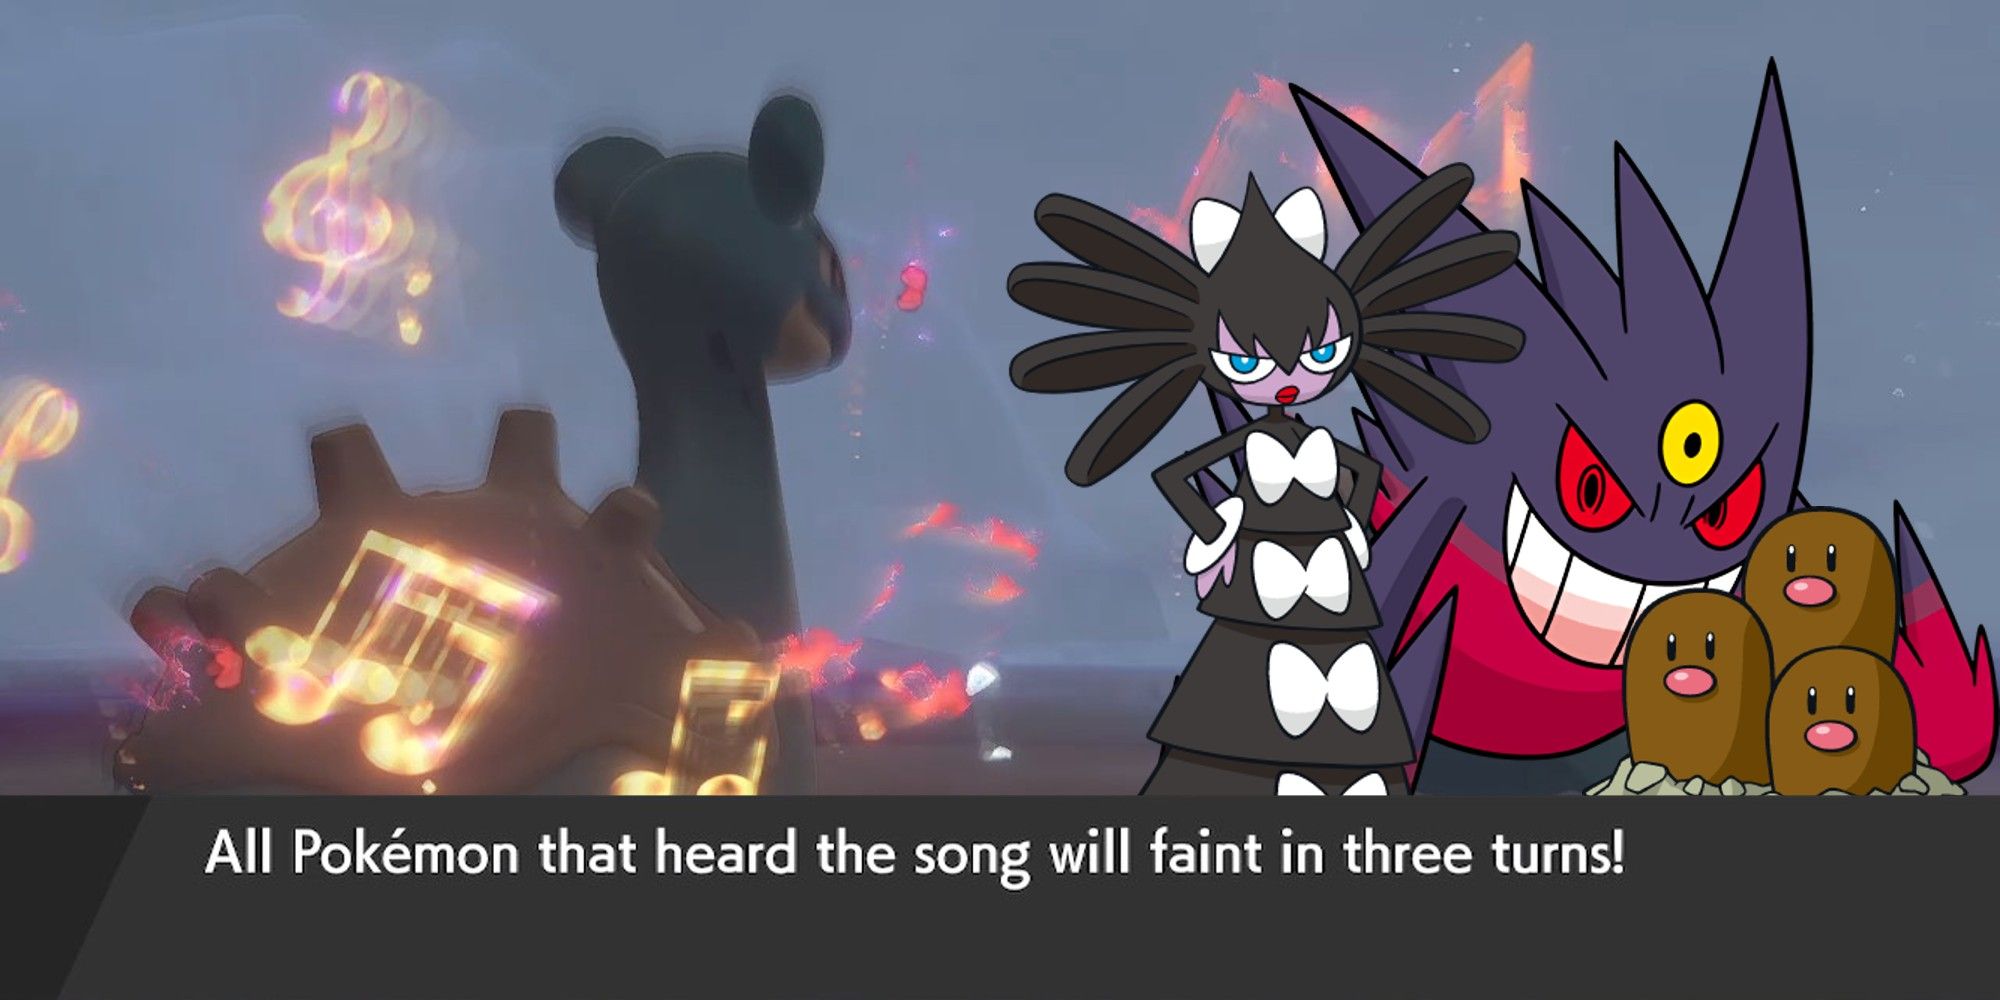 Lapras is using Perish Song in the background. Gothitelle, Mega Gengar, and Dugtrio pose on the right side.